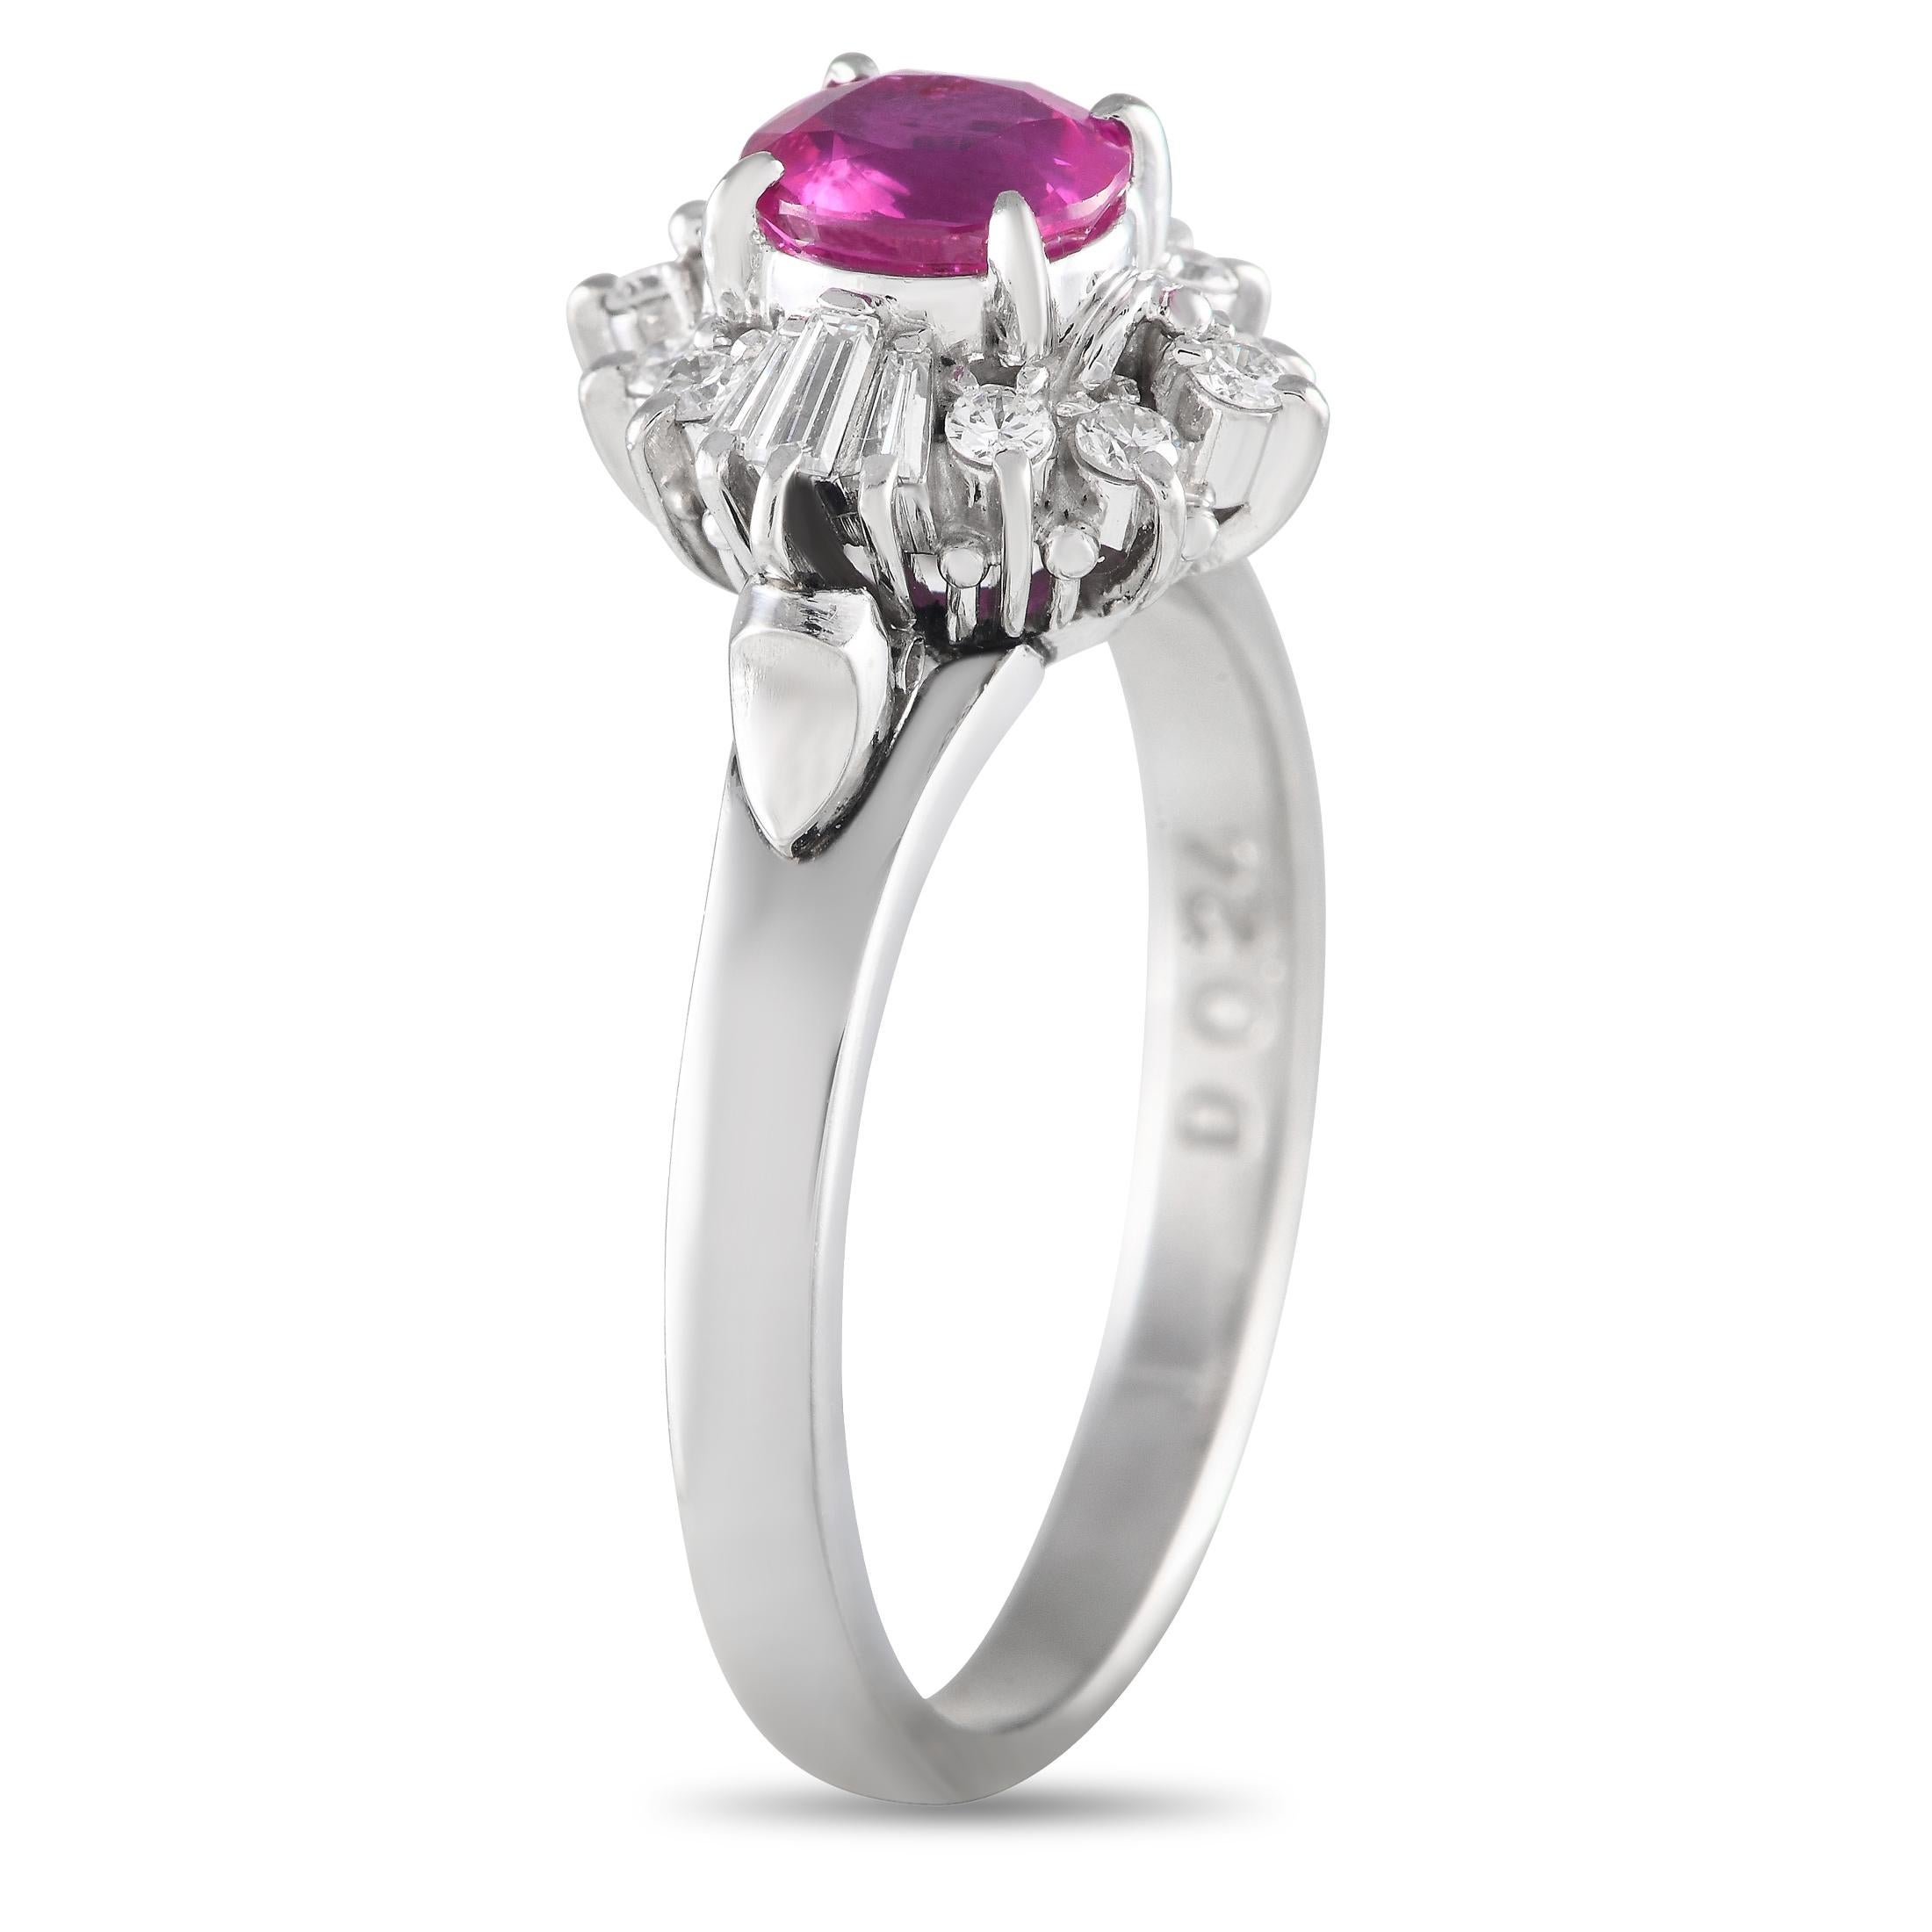 Dreamy and distinctly feminine. This platinum ring features a modestly sized but stunning 0.69 ct ruby framed by the icy white sparkle of round and baguette diamonds. The ring's top dimensions measure 17mm by 11mm.Offered in estate condition, this